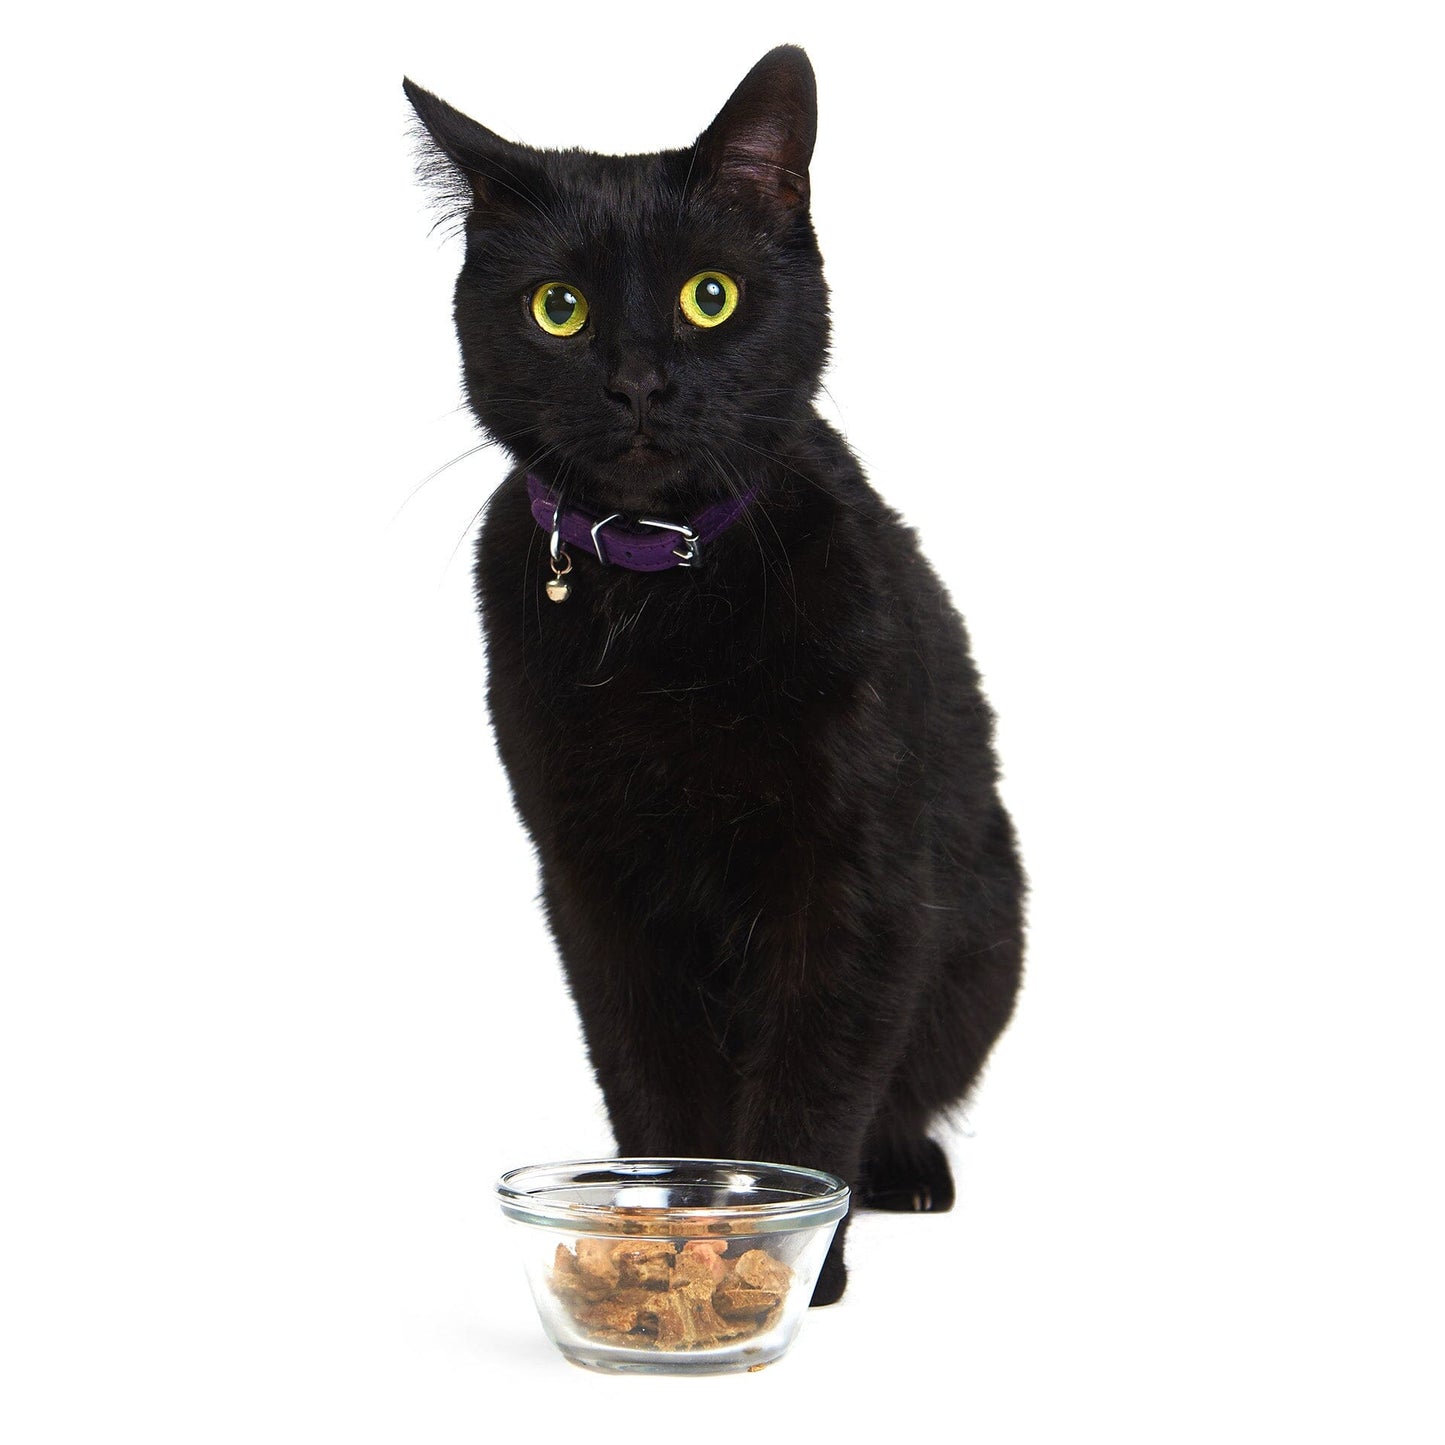 
                  
                    Very Berry for Cats Crunchy Style Smack Pet Food 
                  
                